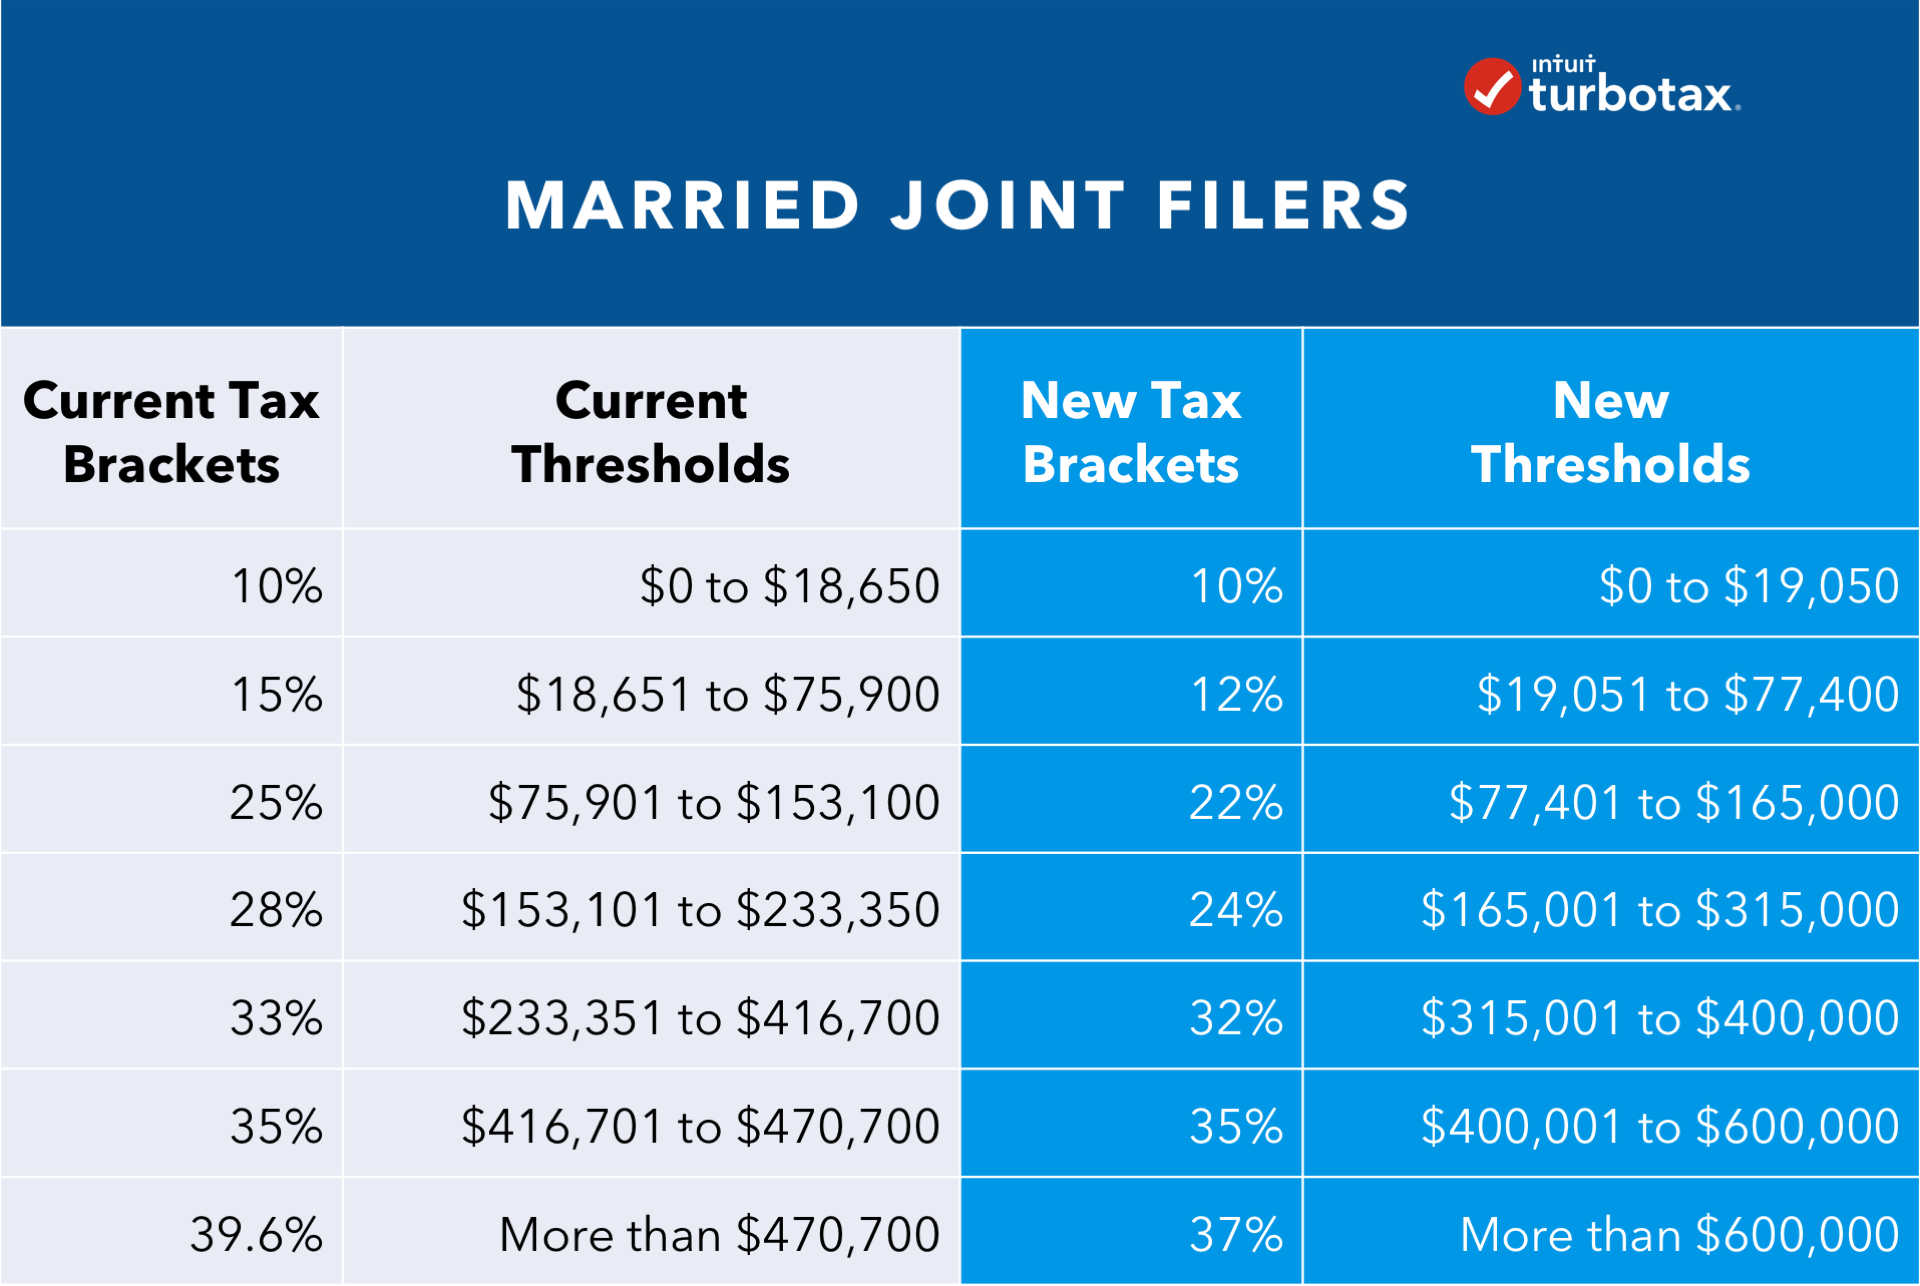 Table of data graphic with married joint filer data